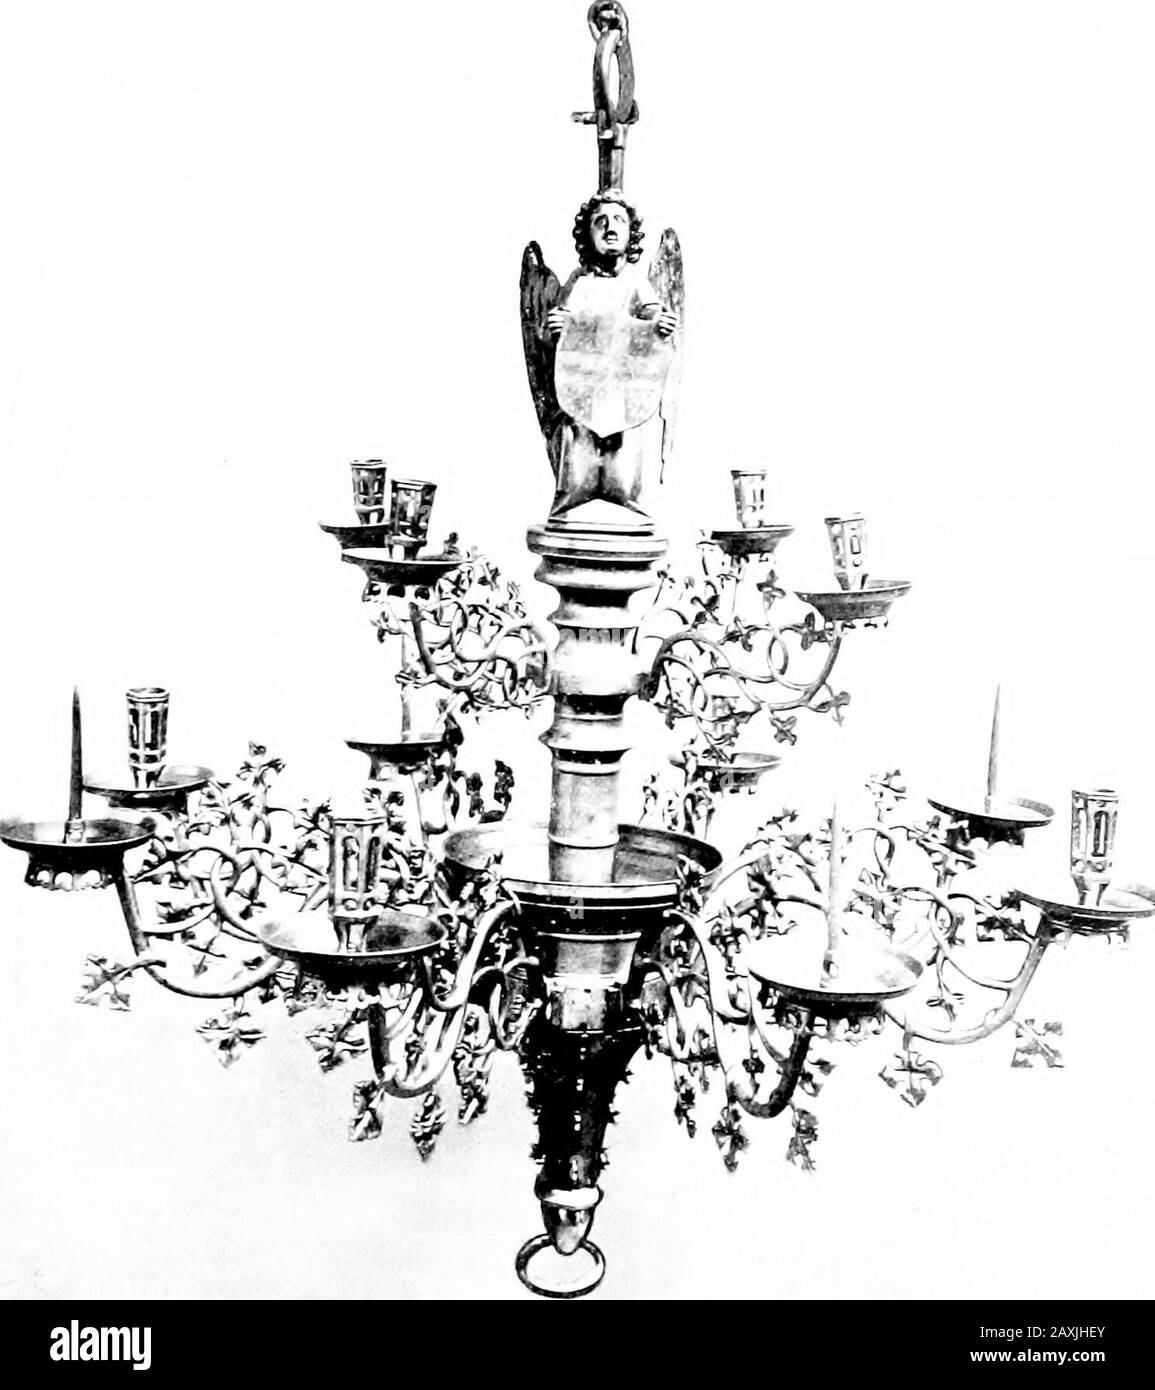 Dinanderie; a history and description of mediæval art work in copper, brass and bronze . Fig. 47.—Chandelier, Temple Church, Bristol chandelier in the Victoria and Albert Museum (Plate XXVI.),but whence it came seems uncertain.. Il.AlE XX[ CIIAXDELIEU, IX THE V. AXD A. MUSEUM &lt;^ ^-^ Stock Photo